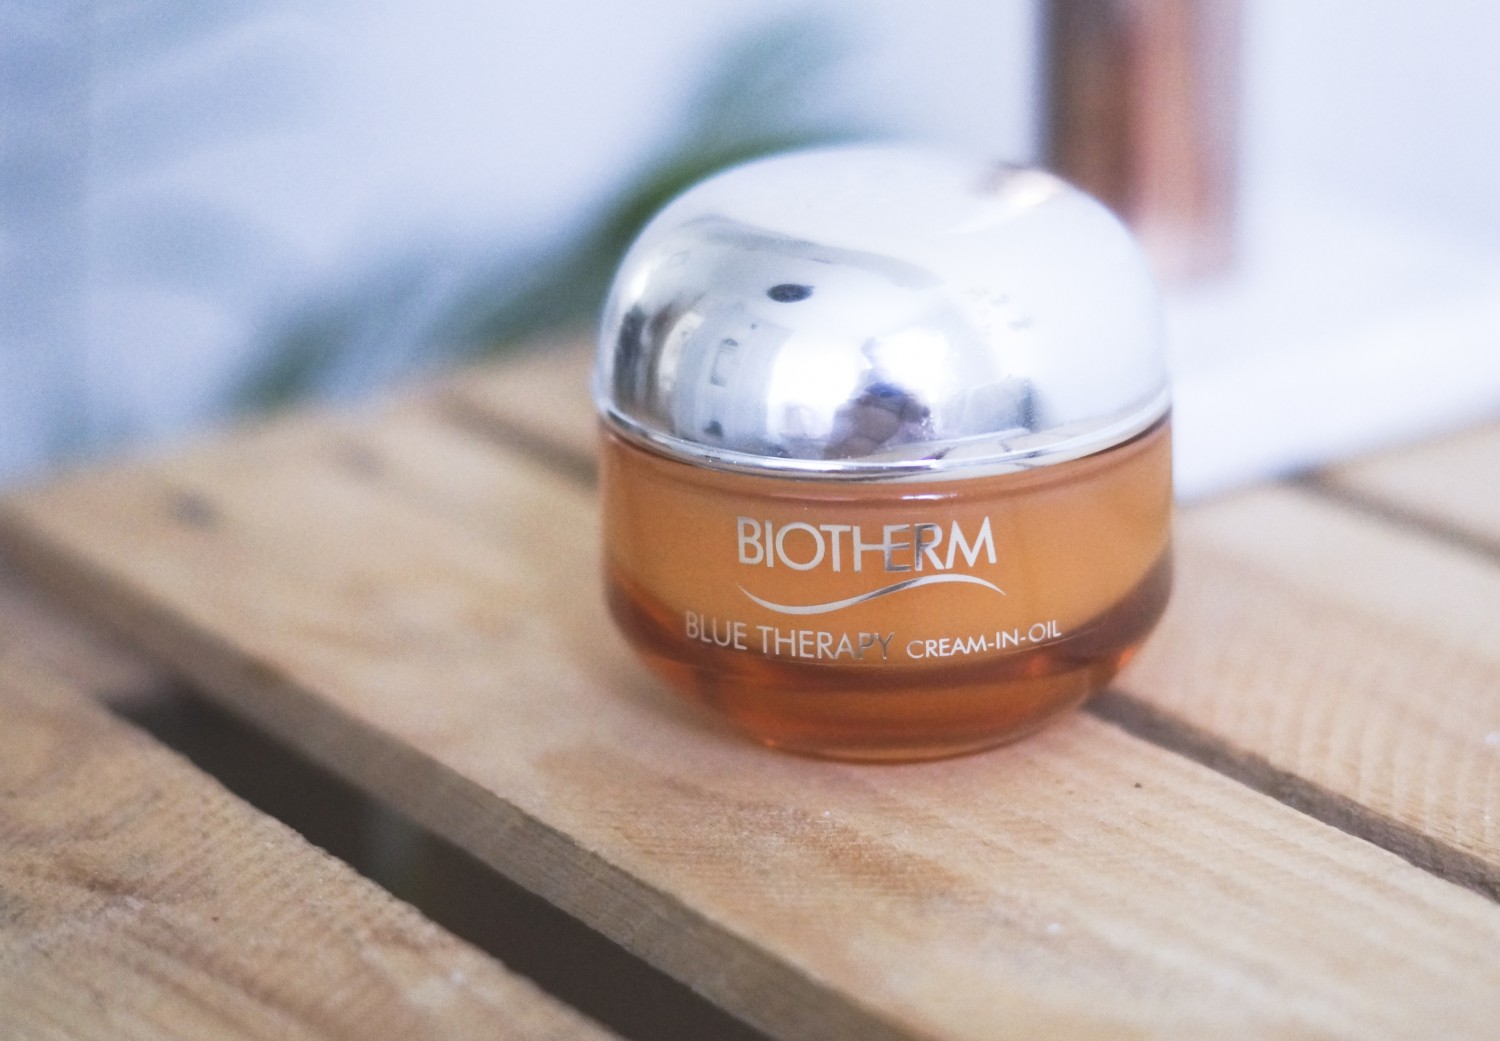 biotherm, blue therapy, cream-in-oil, biotherm blue therapy, tør hud, dry skin, olie, ansigtscreme, ansigt, facial cream, blog, beauty blog, bbloggers, carola, carola blog, dk, bloggers delight, camilla nørgaard christensen